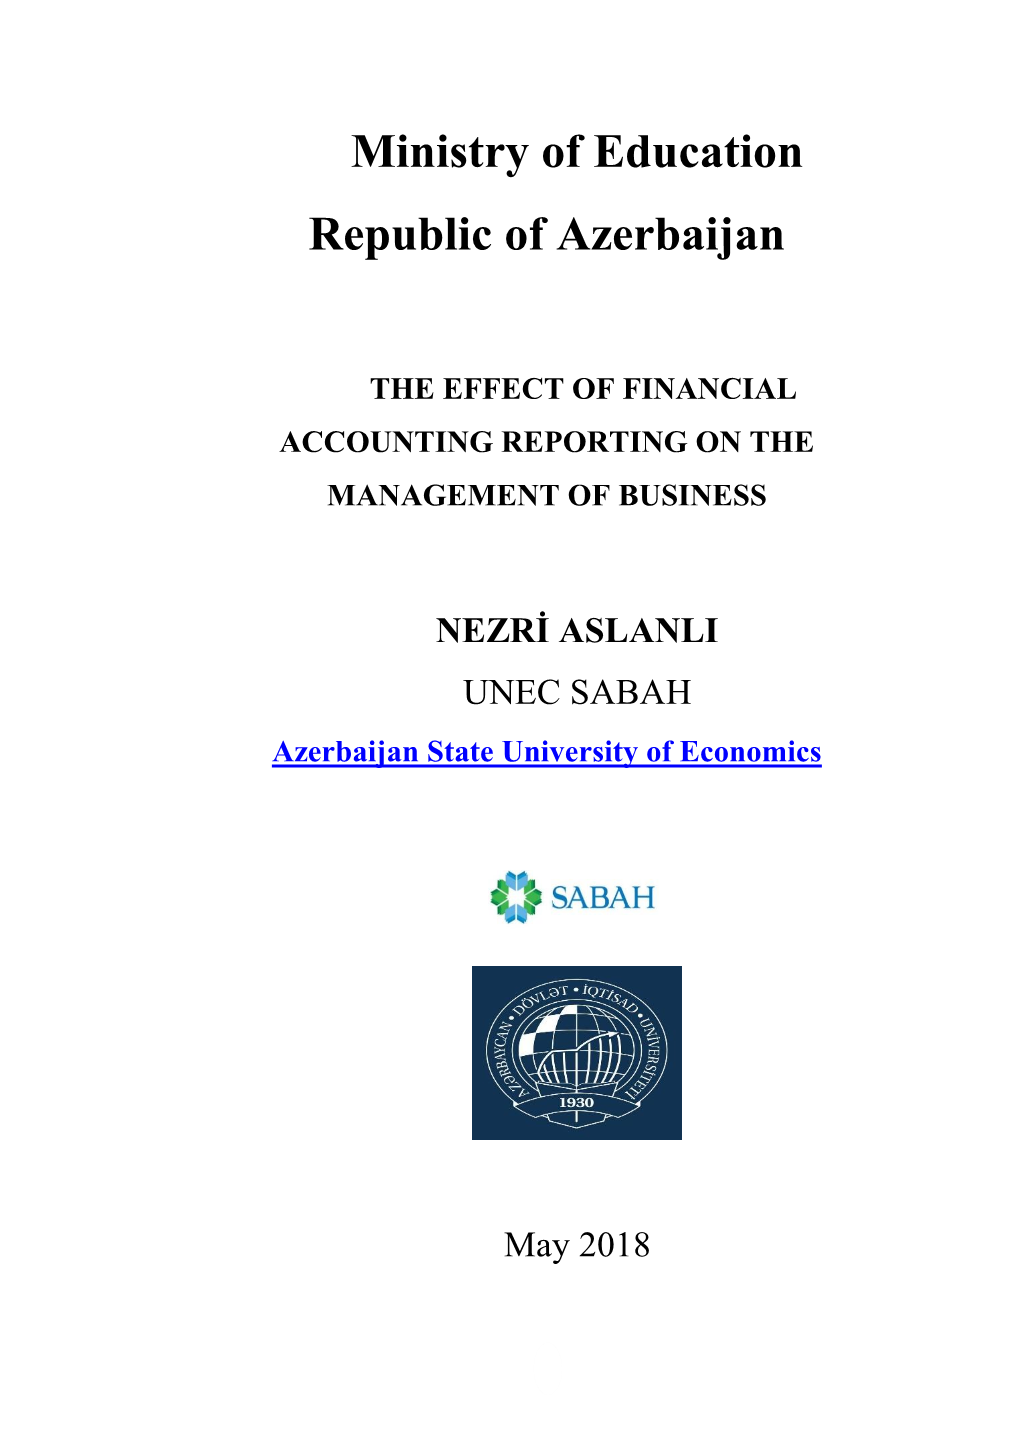 Ministry of Education Republic of Azerbaijan the EFFECT OF